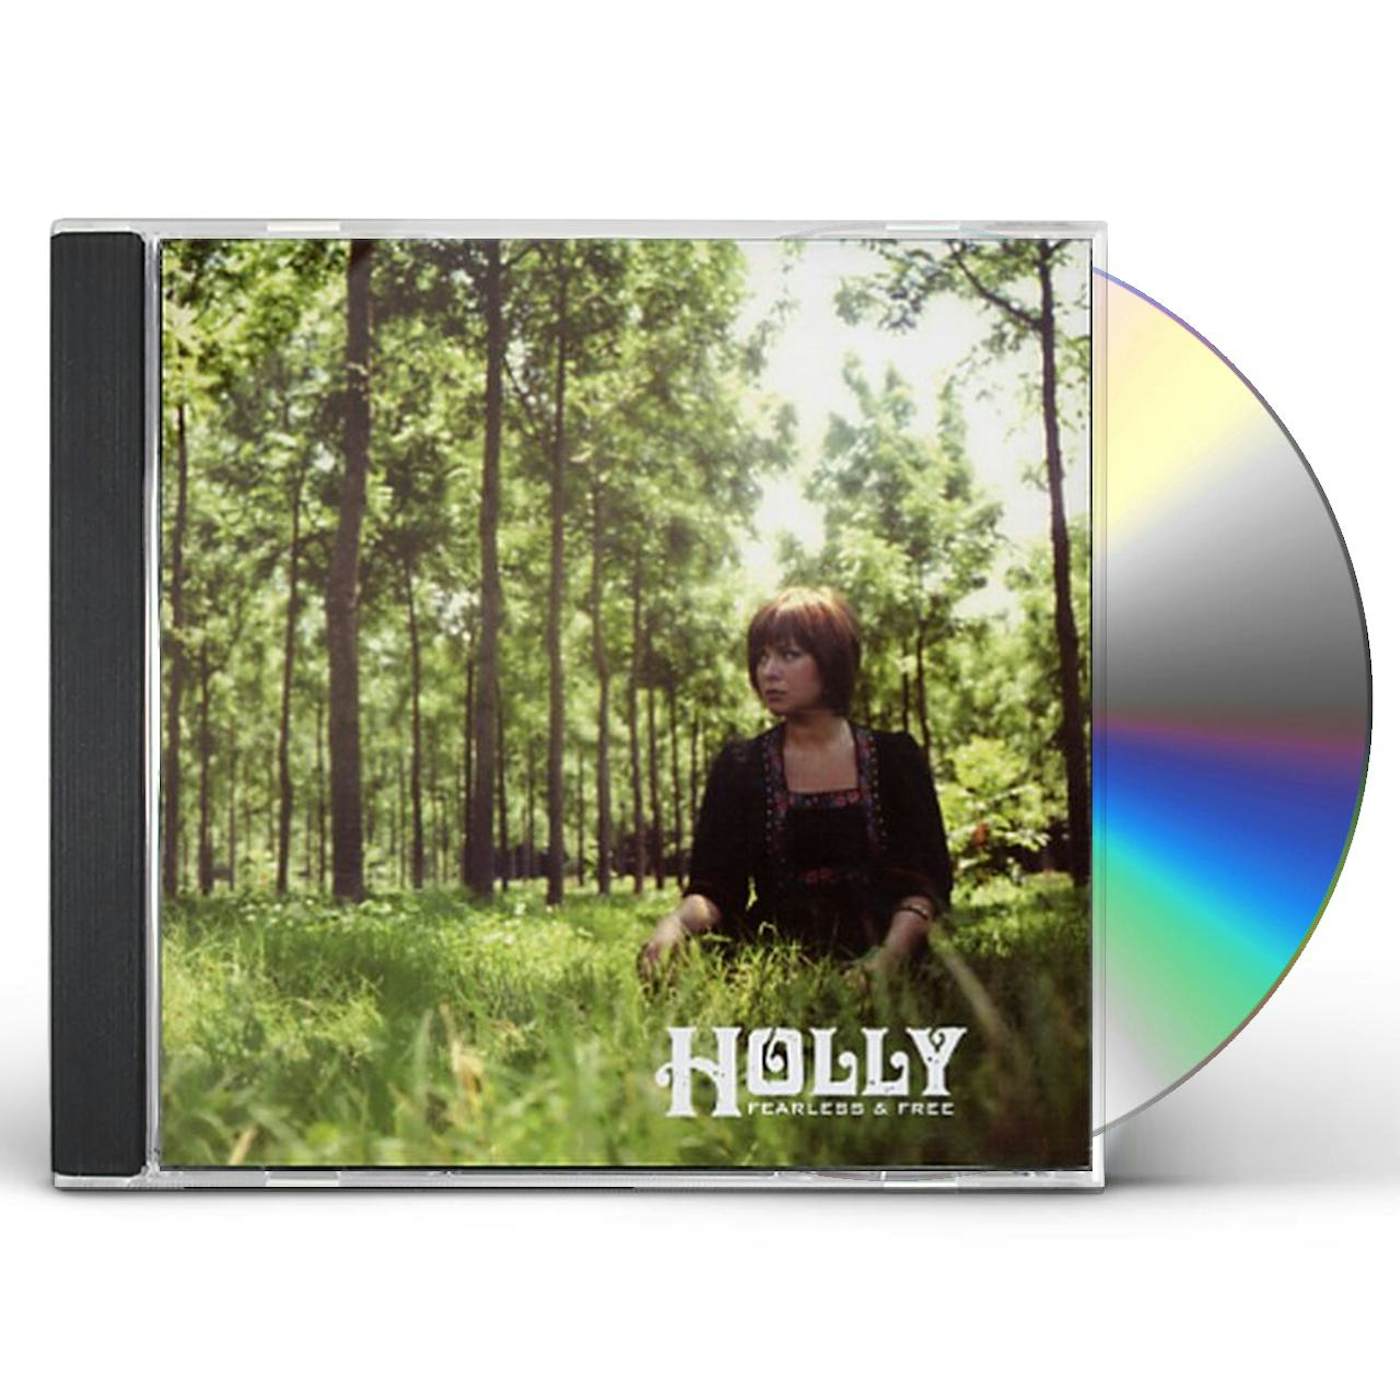 HOLLY FEARLESS & FREE EP CD